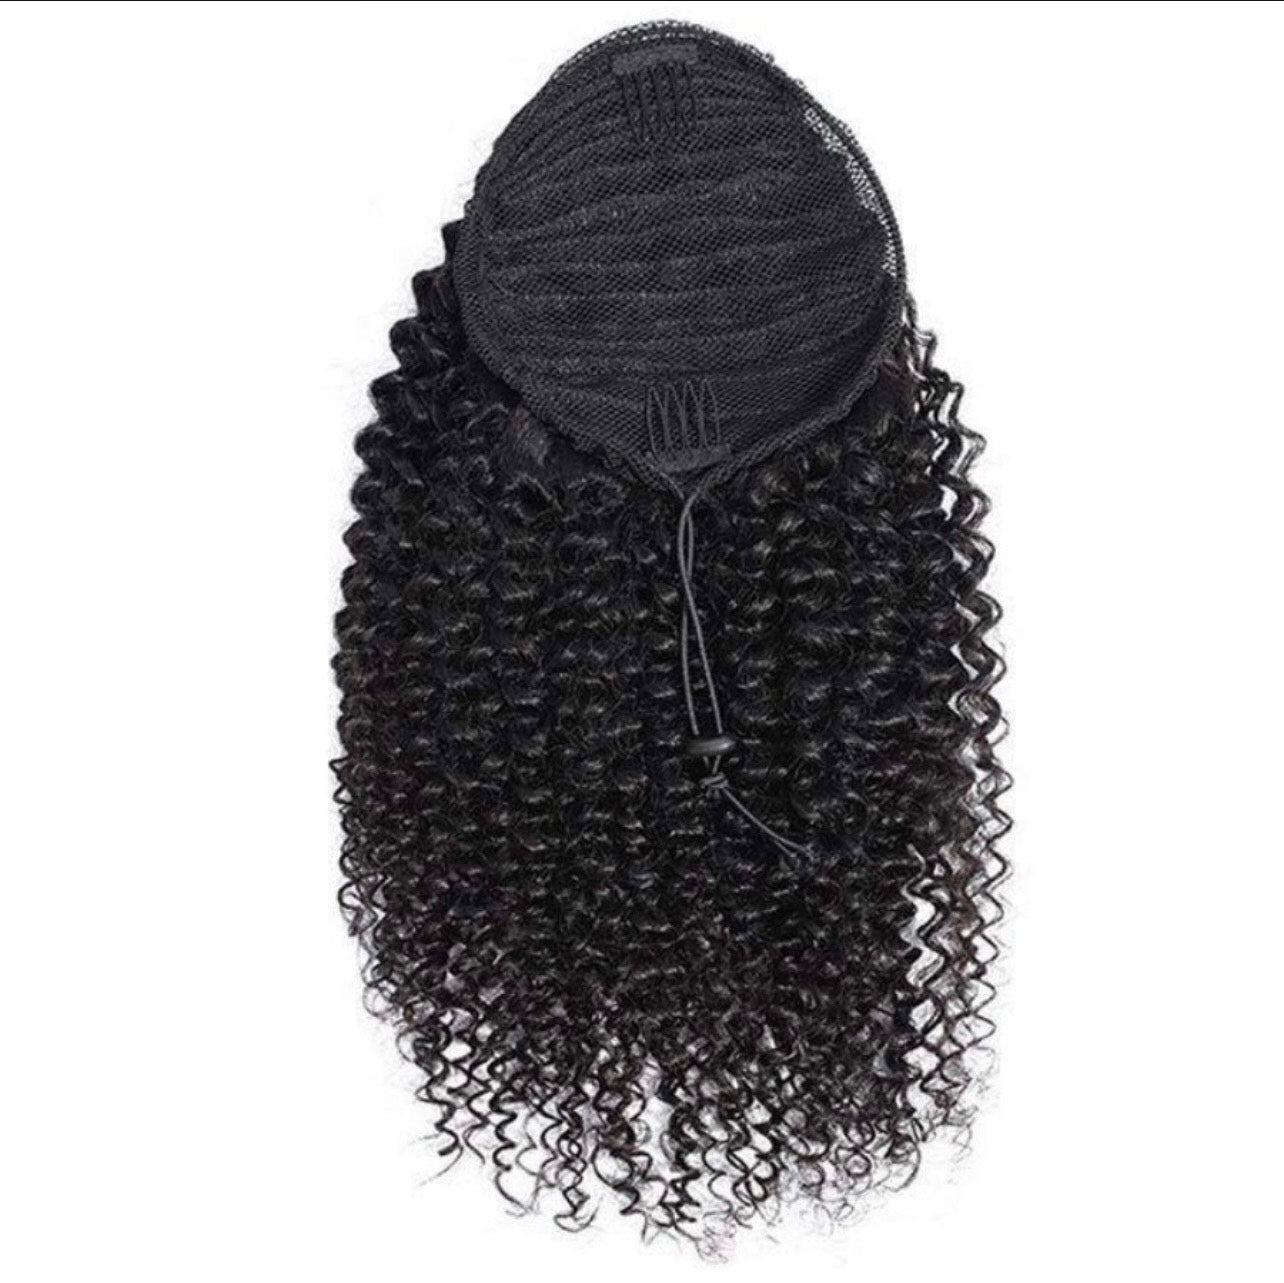 NATURAL KINKY CURLY PONYTAIL 14 INCHES